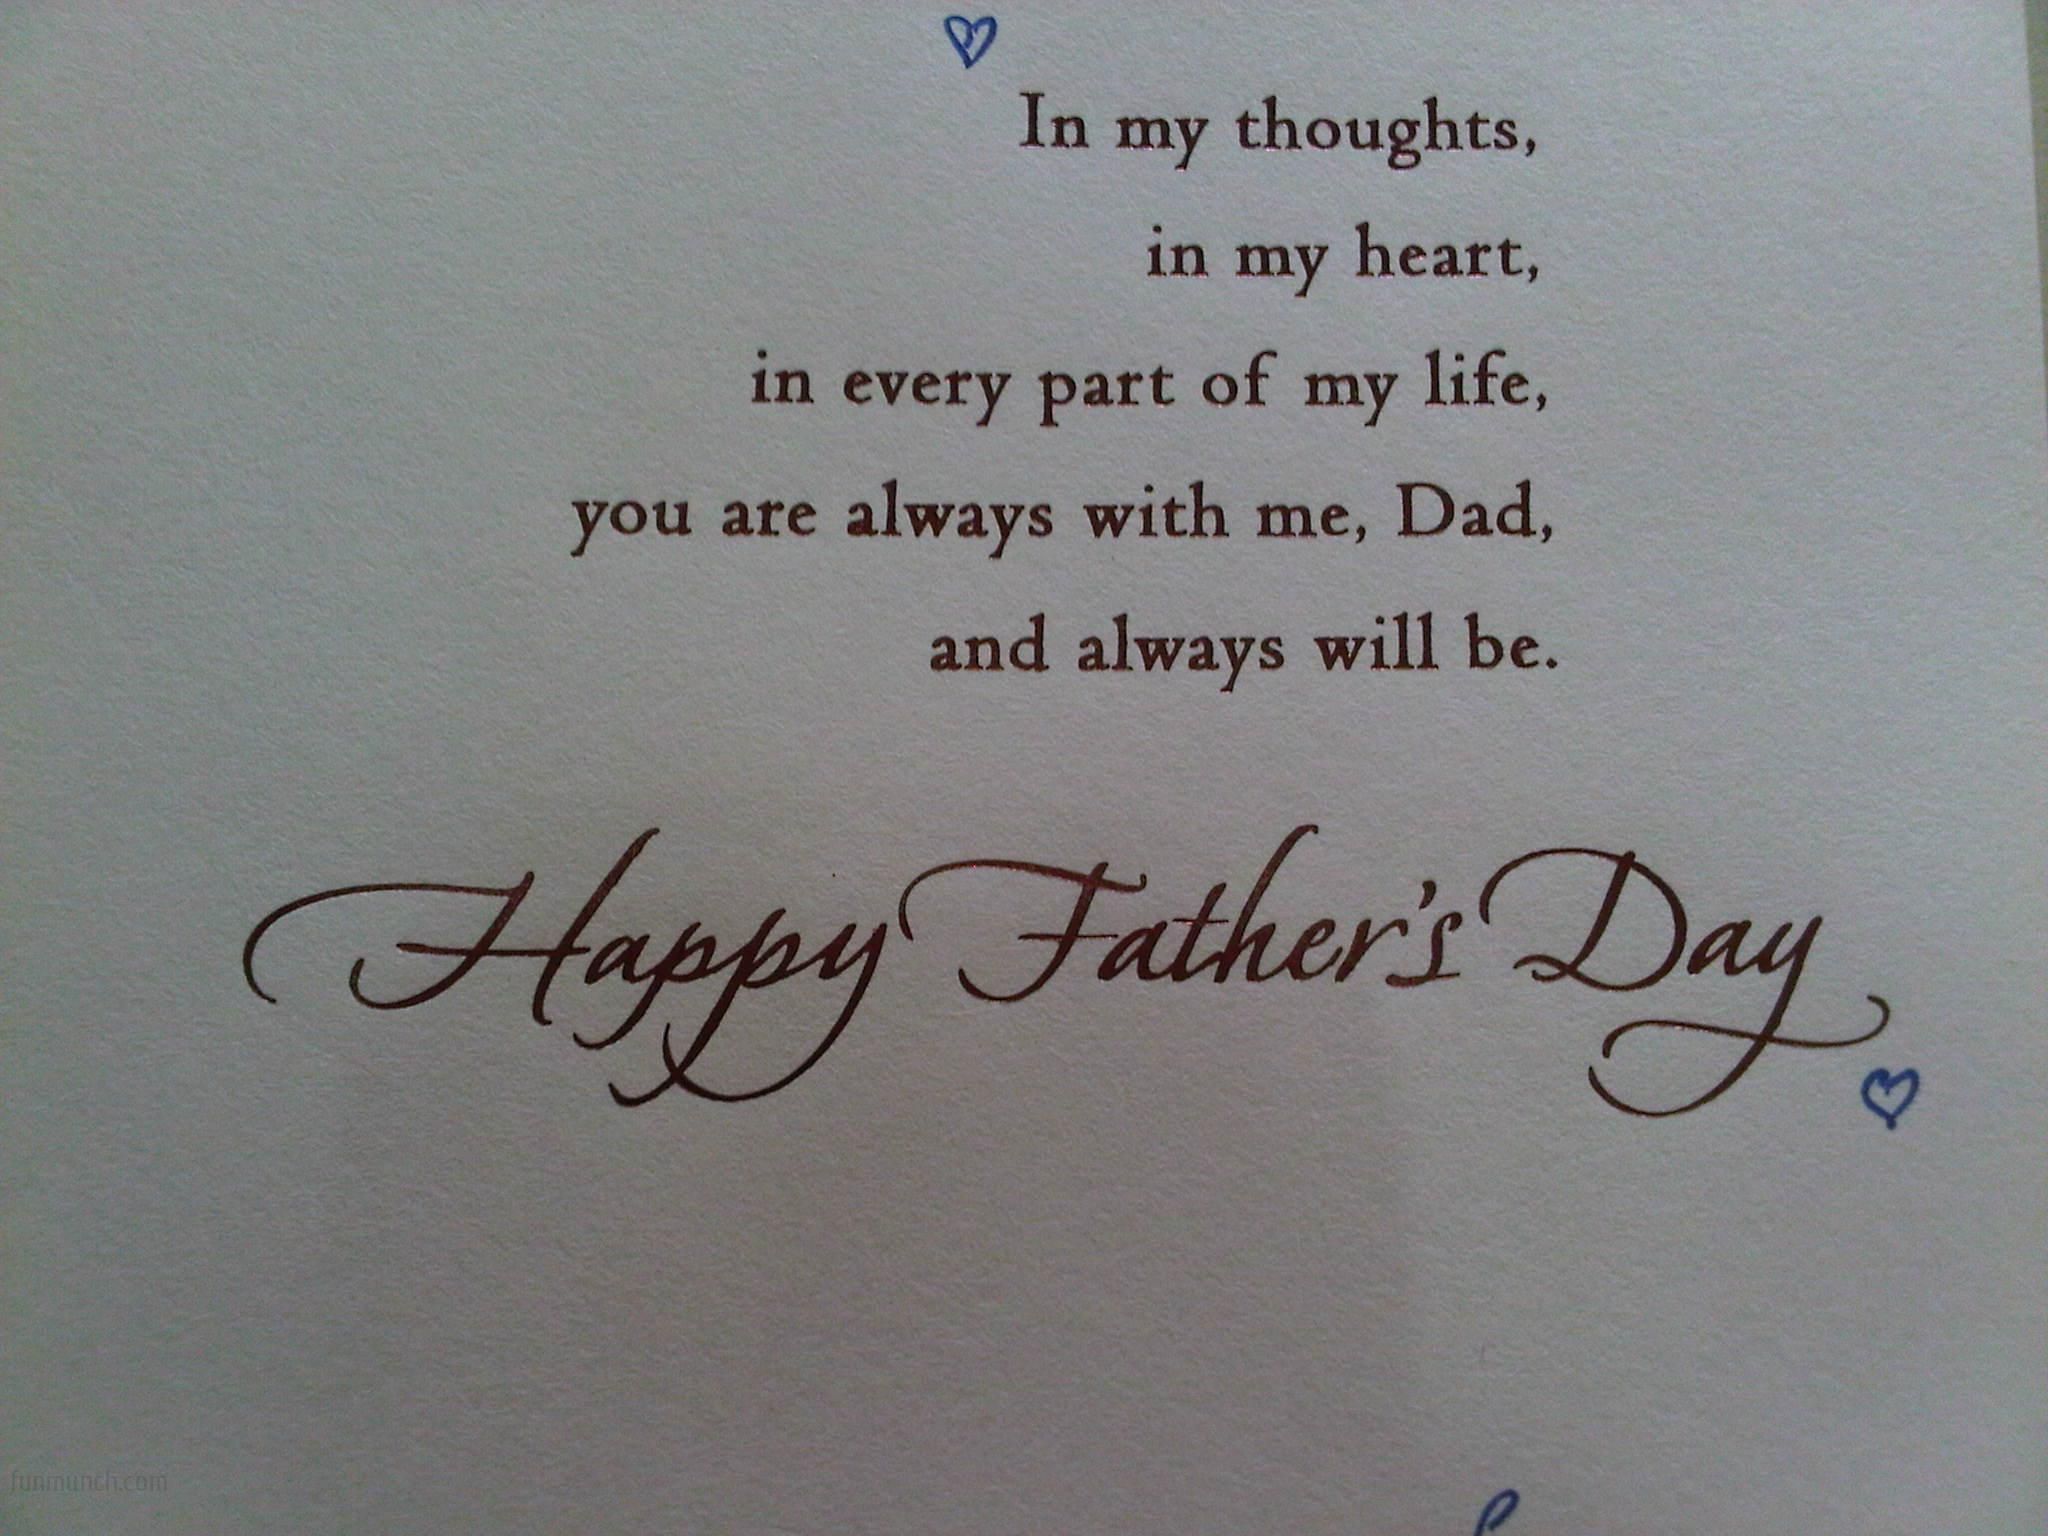 fathers day quotes. Fathers day quotes, Happy